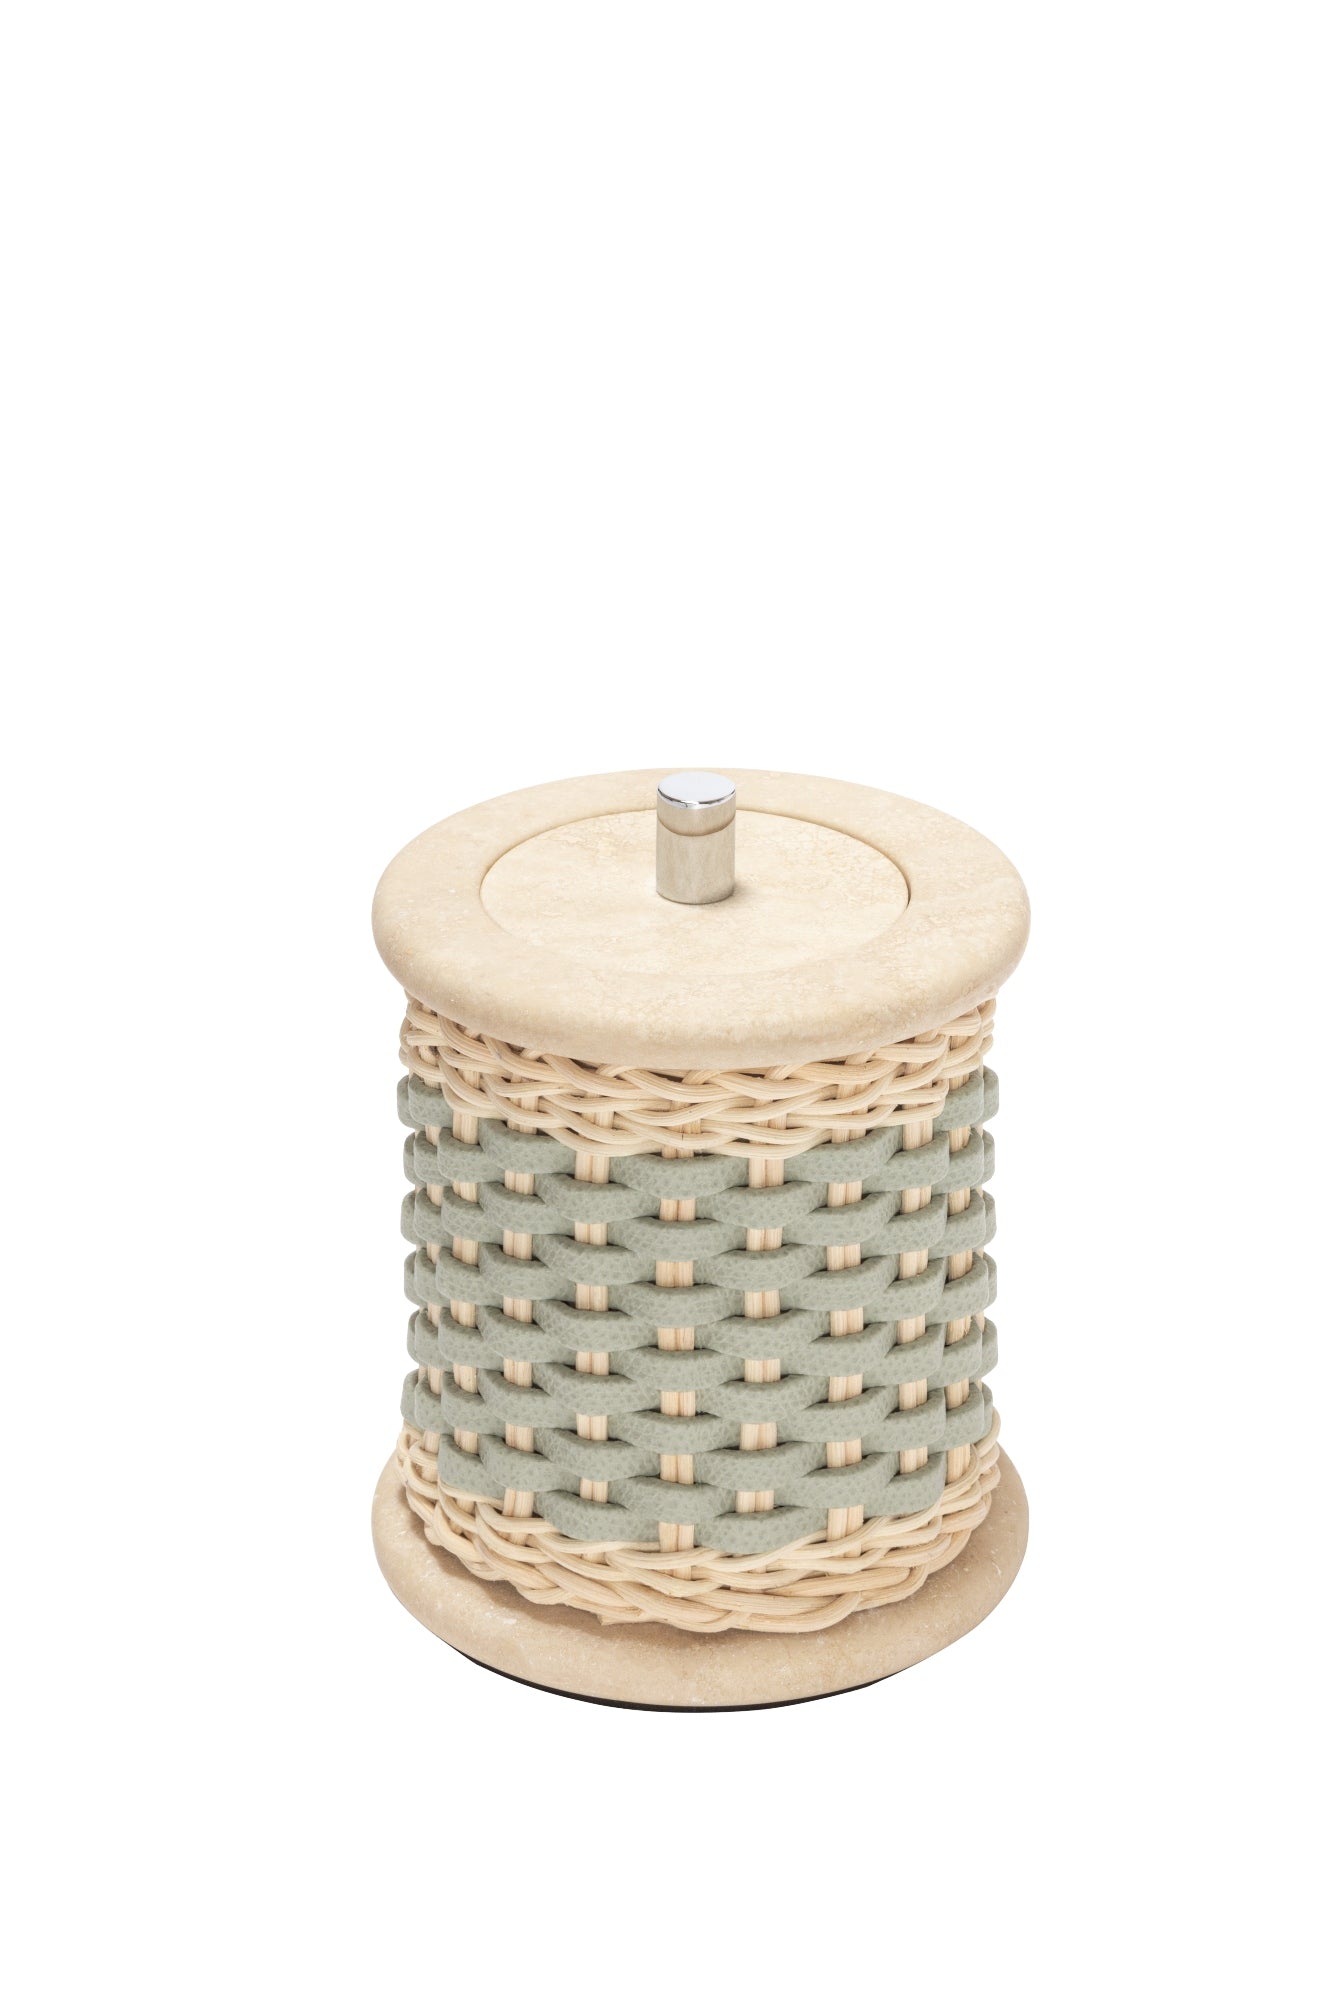 Pigment France Courbet Leather & Rattan Travertine Marble Bathroom Box | Luxurious Bath Accessories | Crafted with High-Quality Materials | Explore a Range of Luxury Home Goods at 2Jour Concierge, #1 luxury high-end gift & lifestyle shop